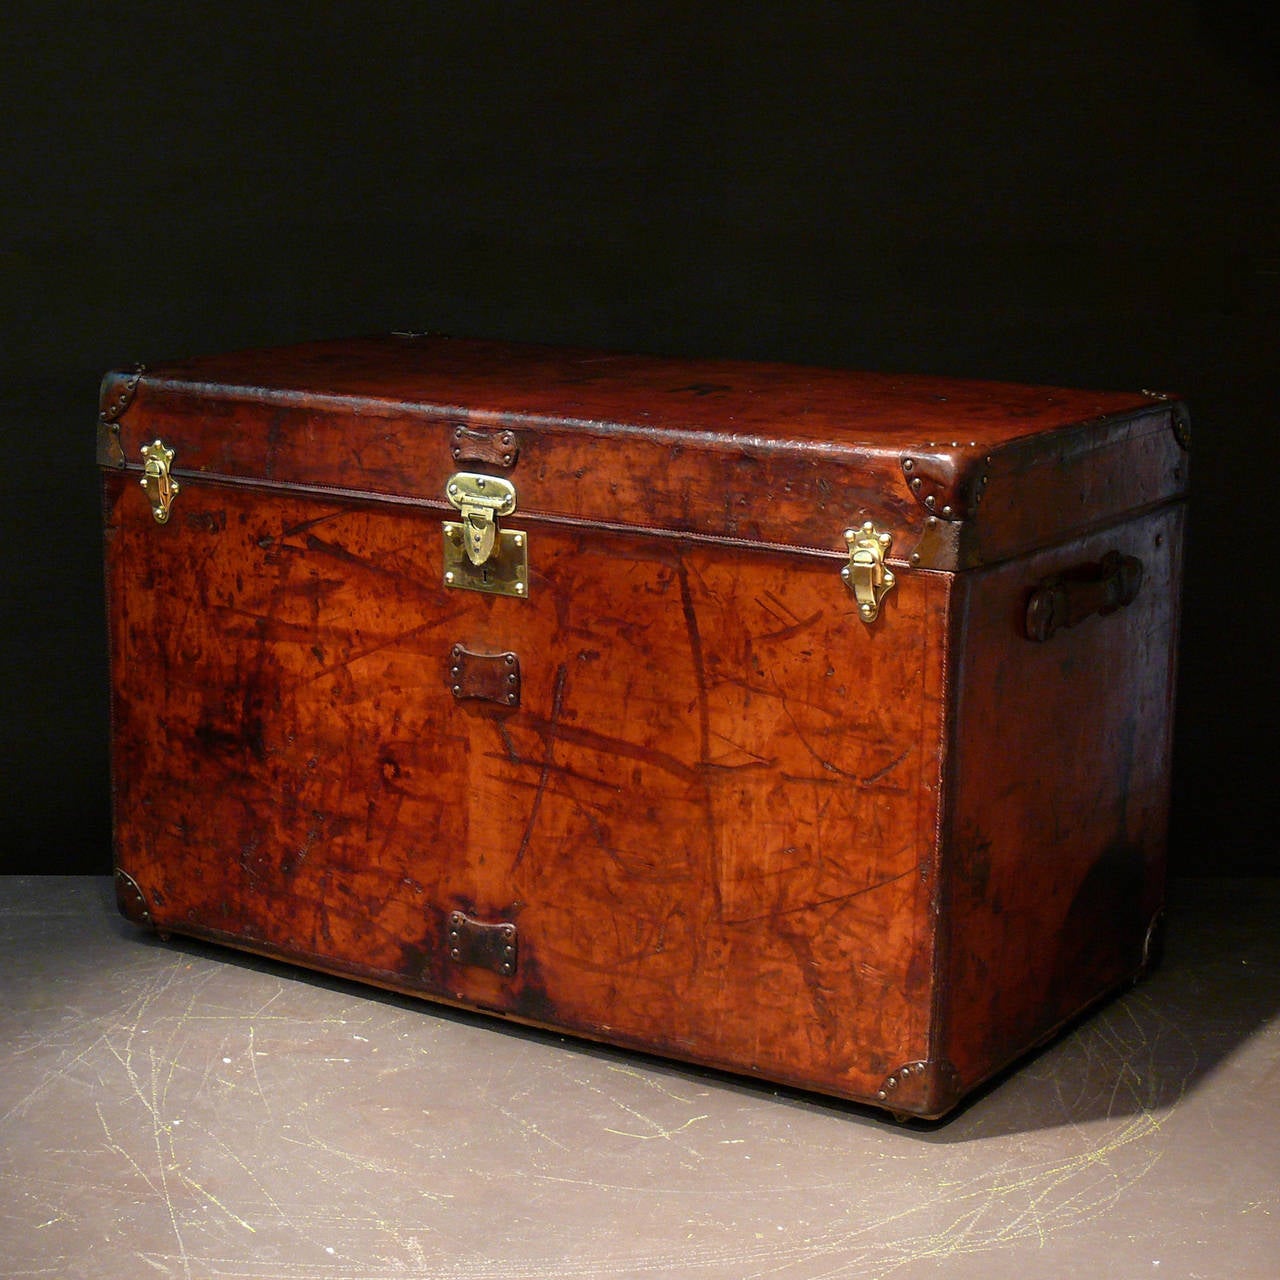 A magnificent and rare leather covered Goyard courier size trunk, circa 1900. With interior relined in alcantara.

Dimensions: 112 cm x 61 cm x 70 cm.

Member of LAPADA.